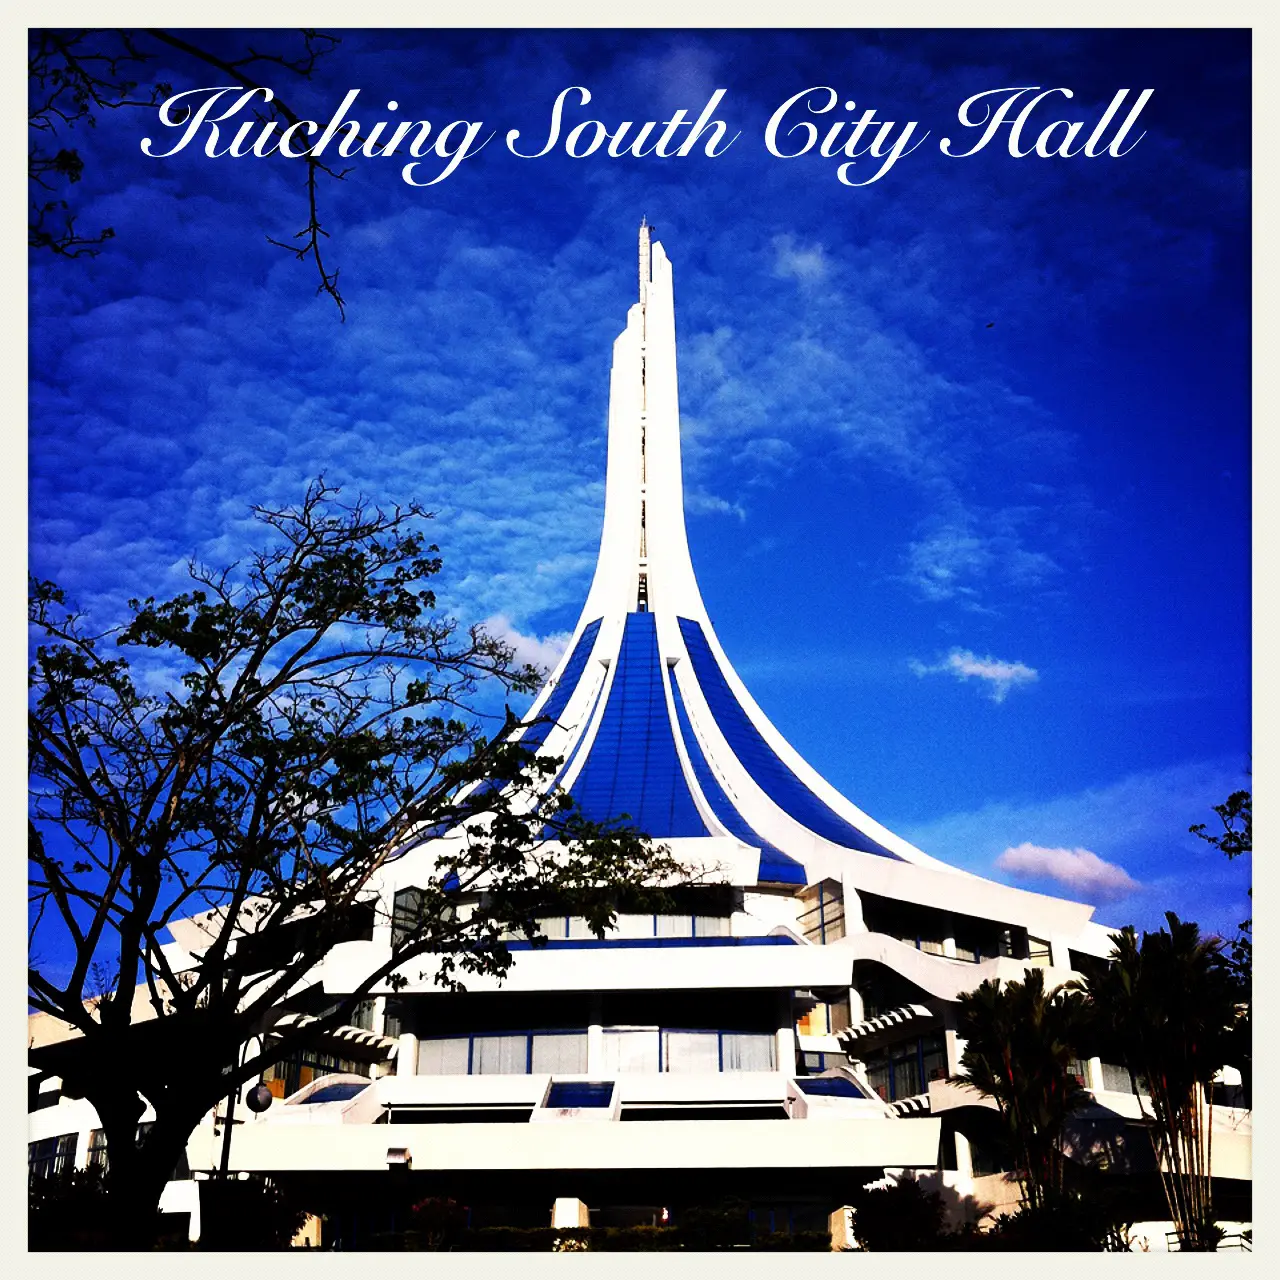 Kuching South City Hall building with stunning blue skies.